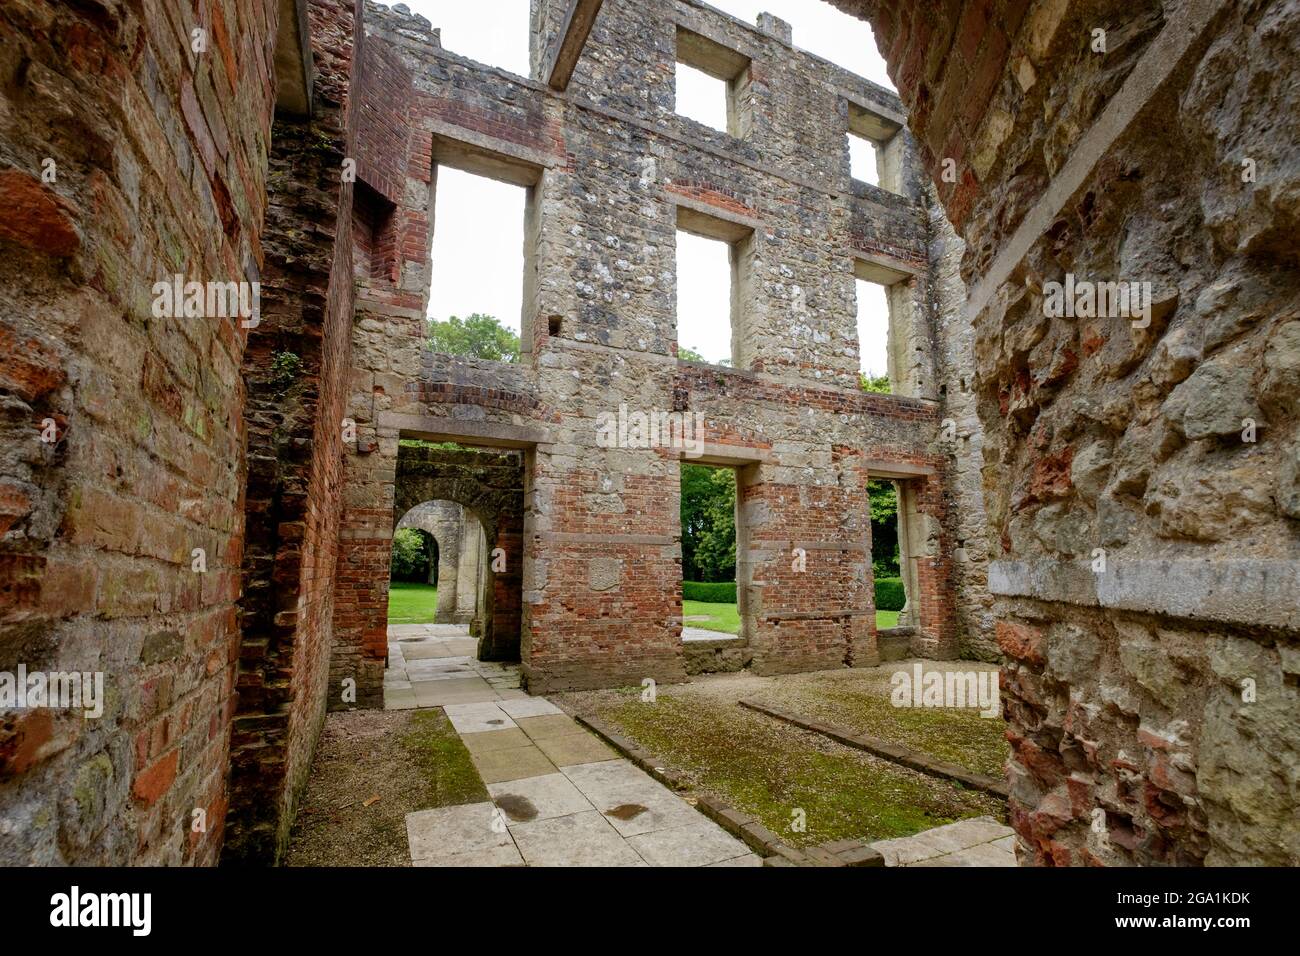 The ruins of Appuldurcombe House an 18th century Baroque style mansion owned by Sir Richard Worsley Isle of Wight Stock Photo